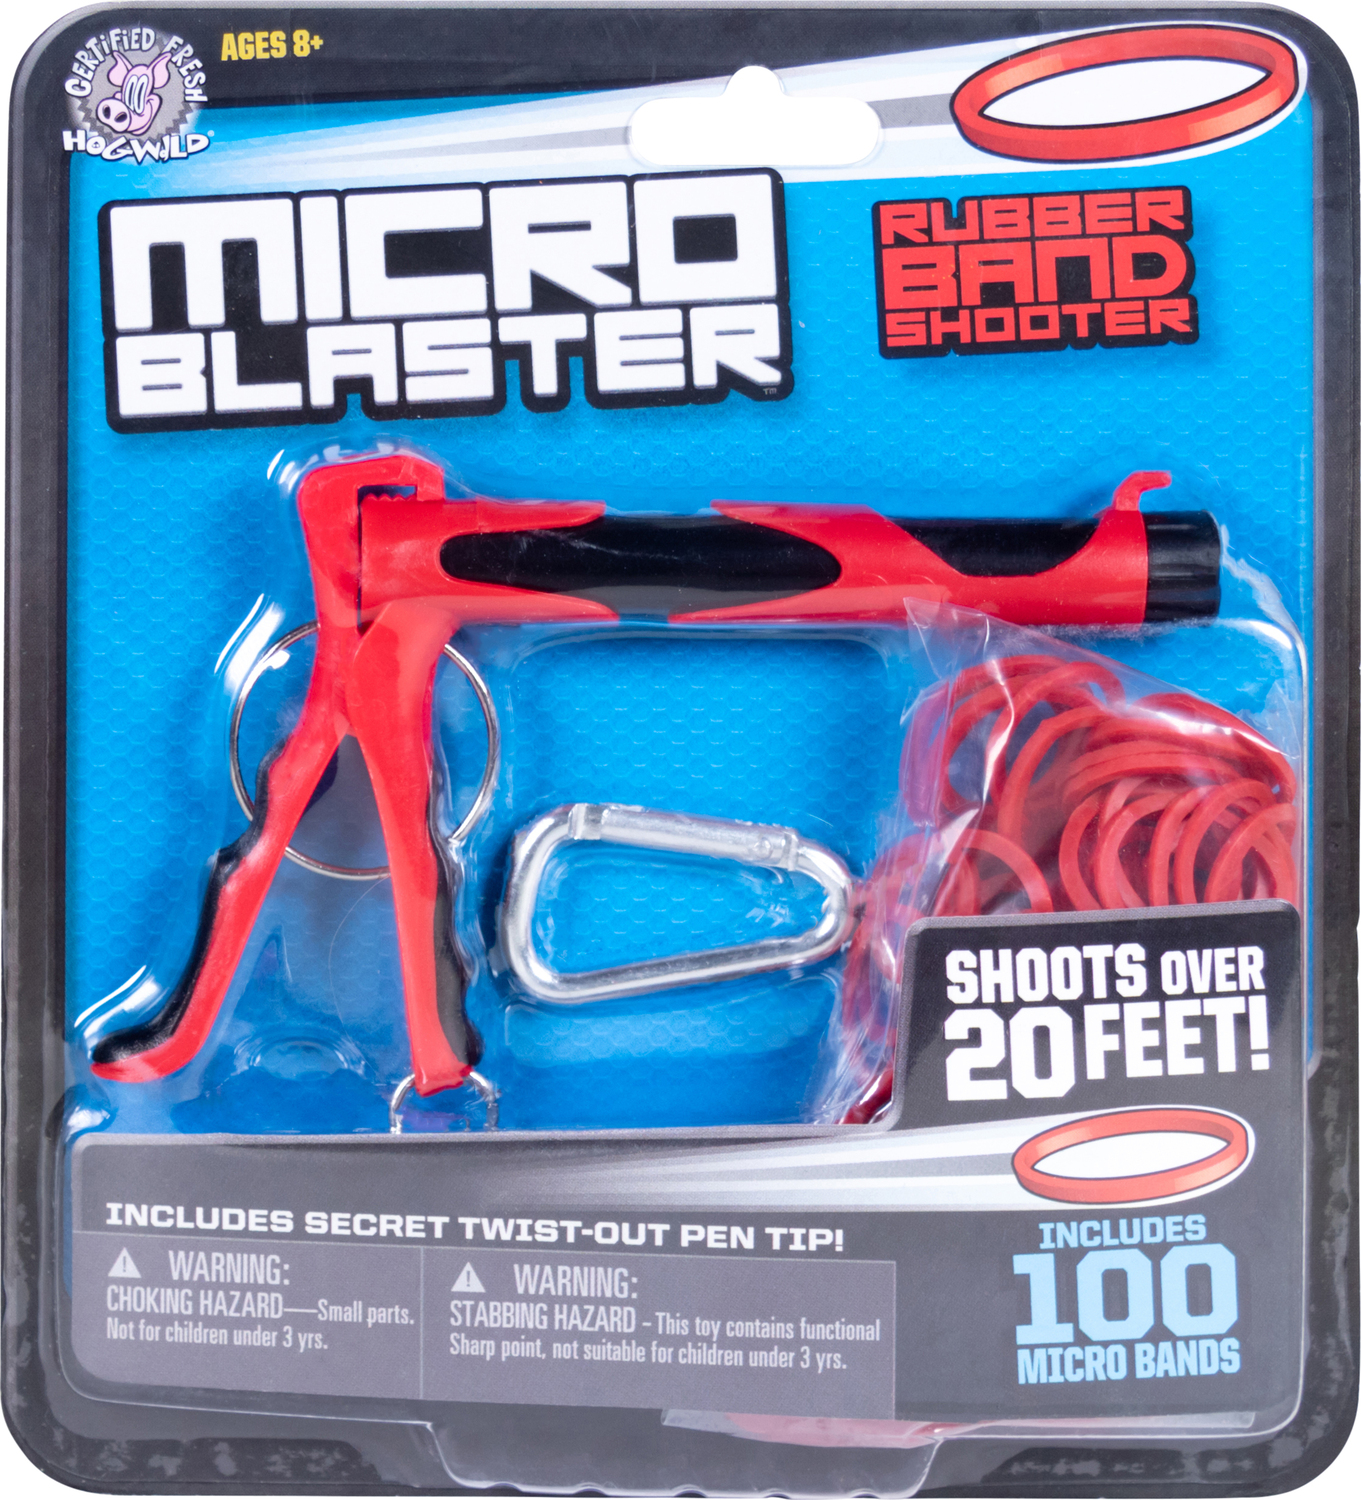 Novelty Toy by Hog Wild shoots 20ft B94 NEW Micro Blaster rubber Band Shooter 